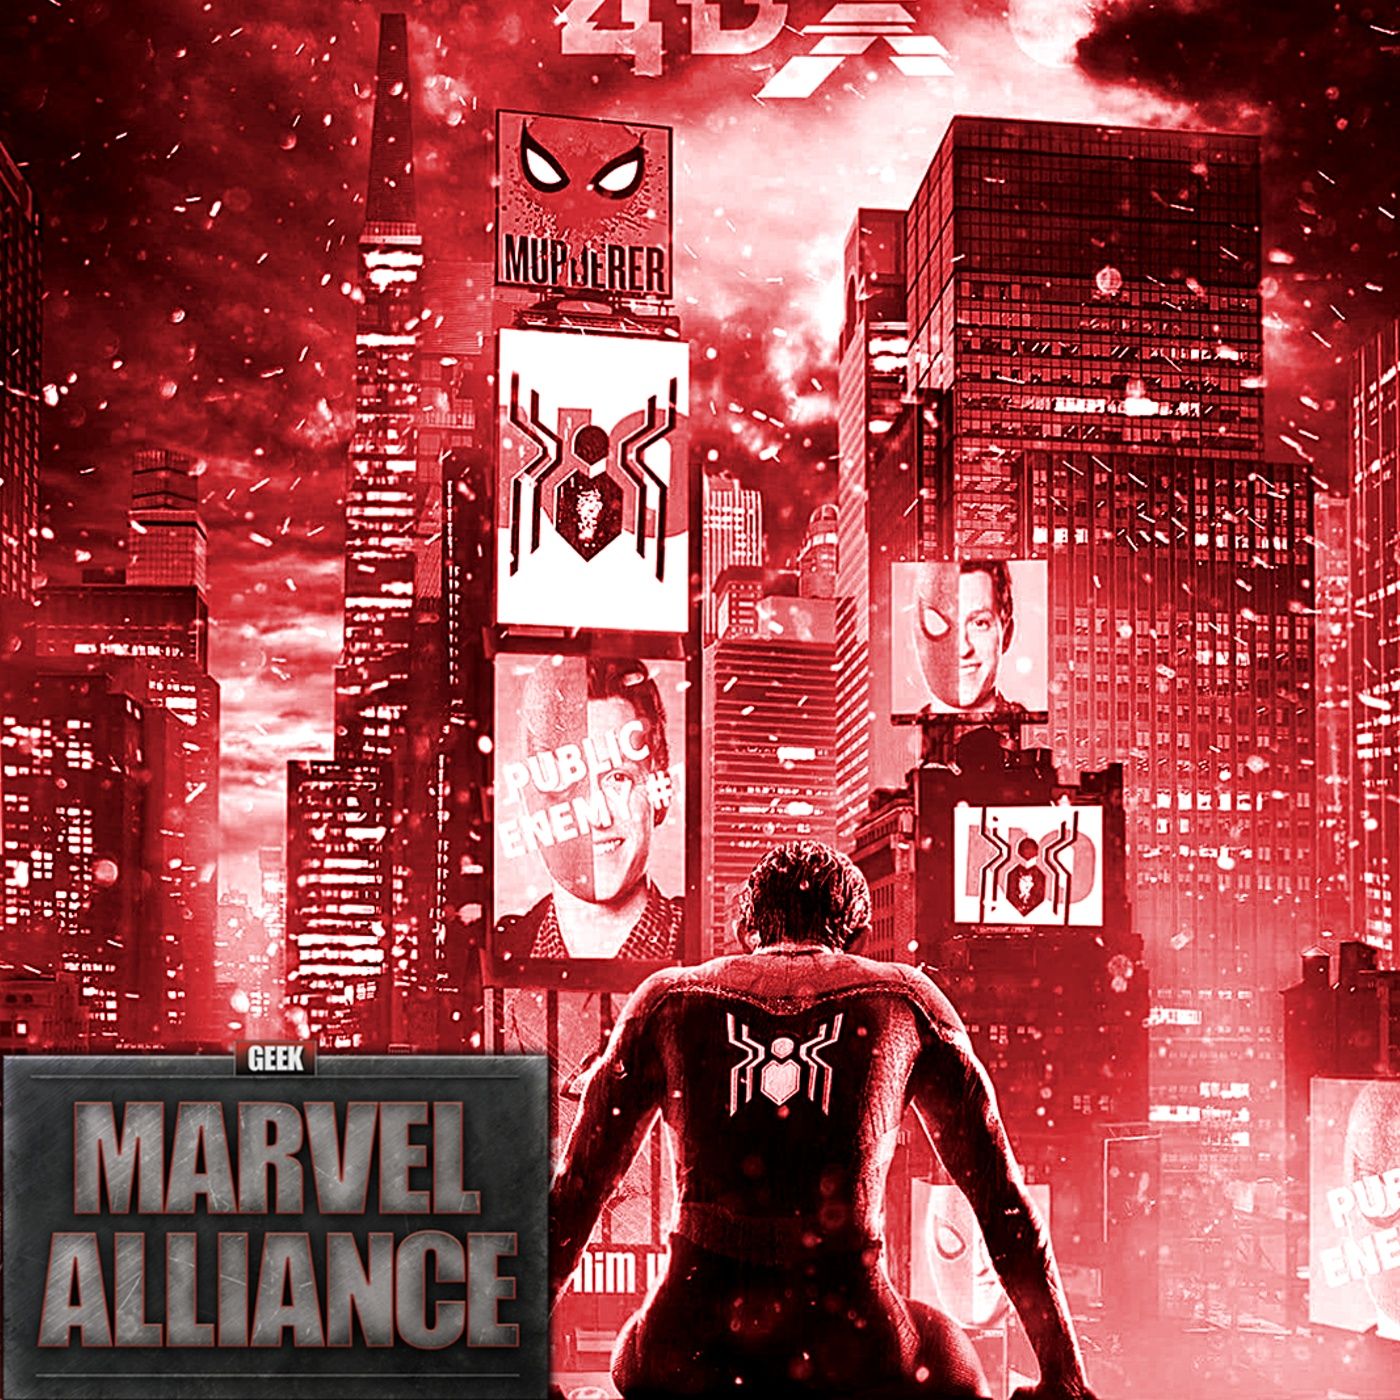 Spider-Man No Way Home Spoilers Review : Marvel Alliance Vol. 85